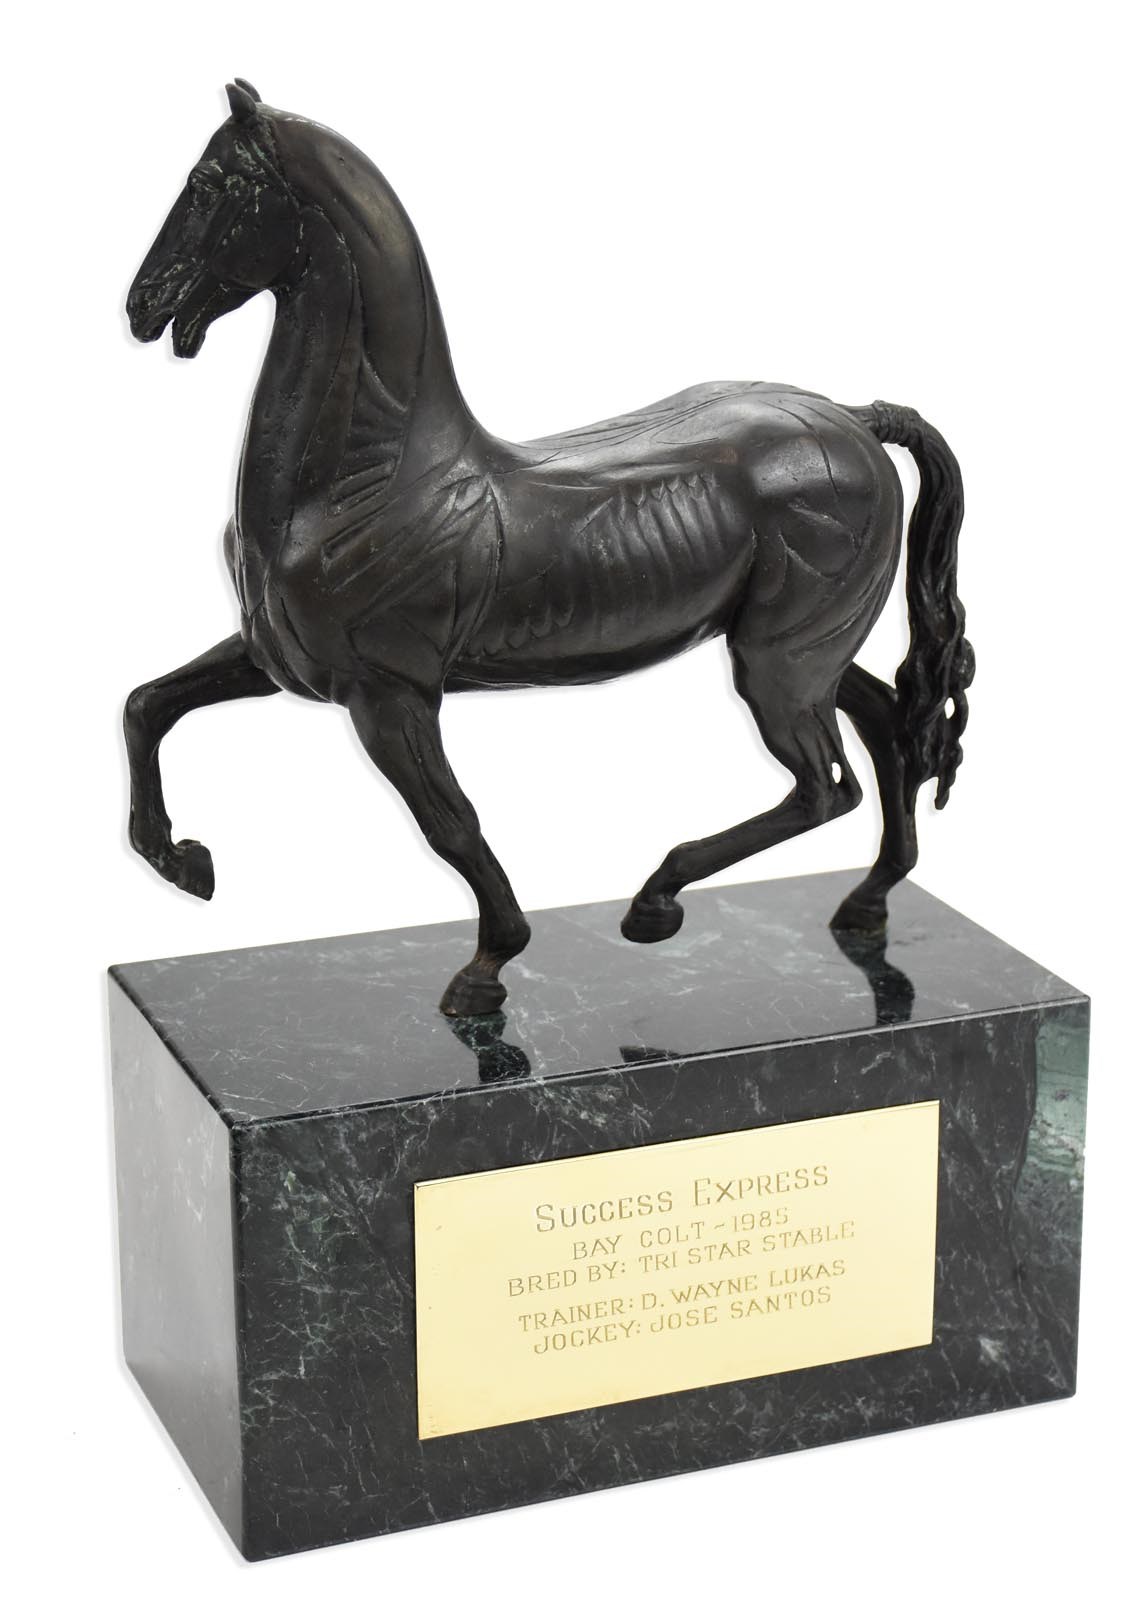 - 1987 Breeders' Cup Juvenile Owner's Trophy - Won by Success Express